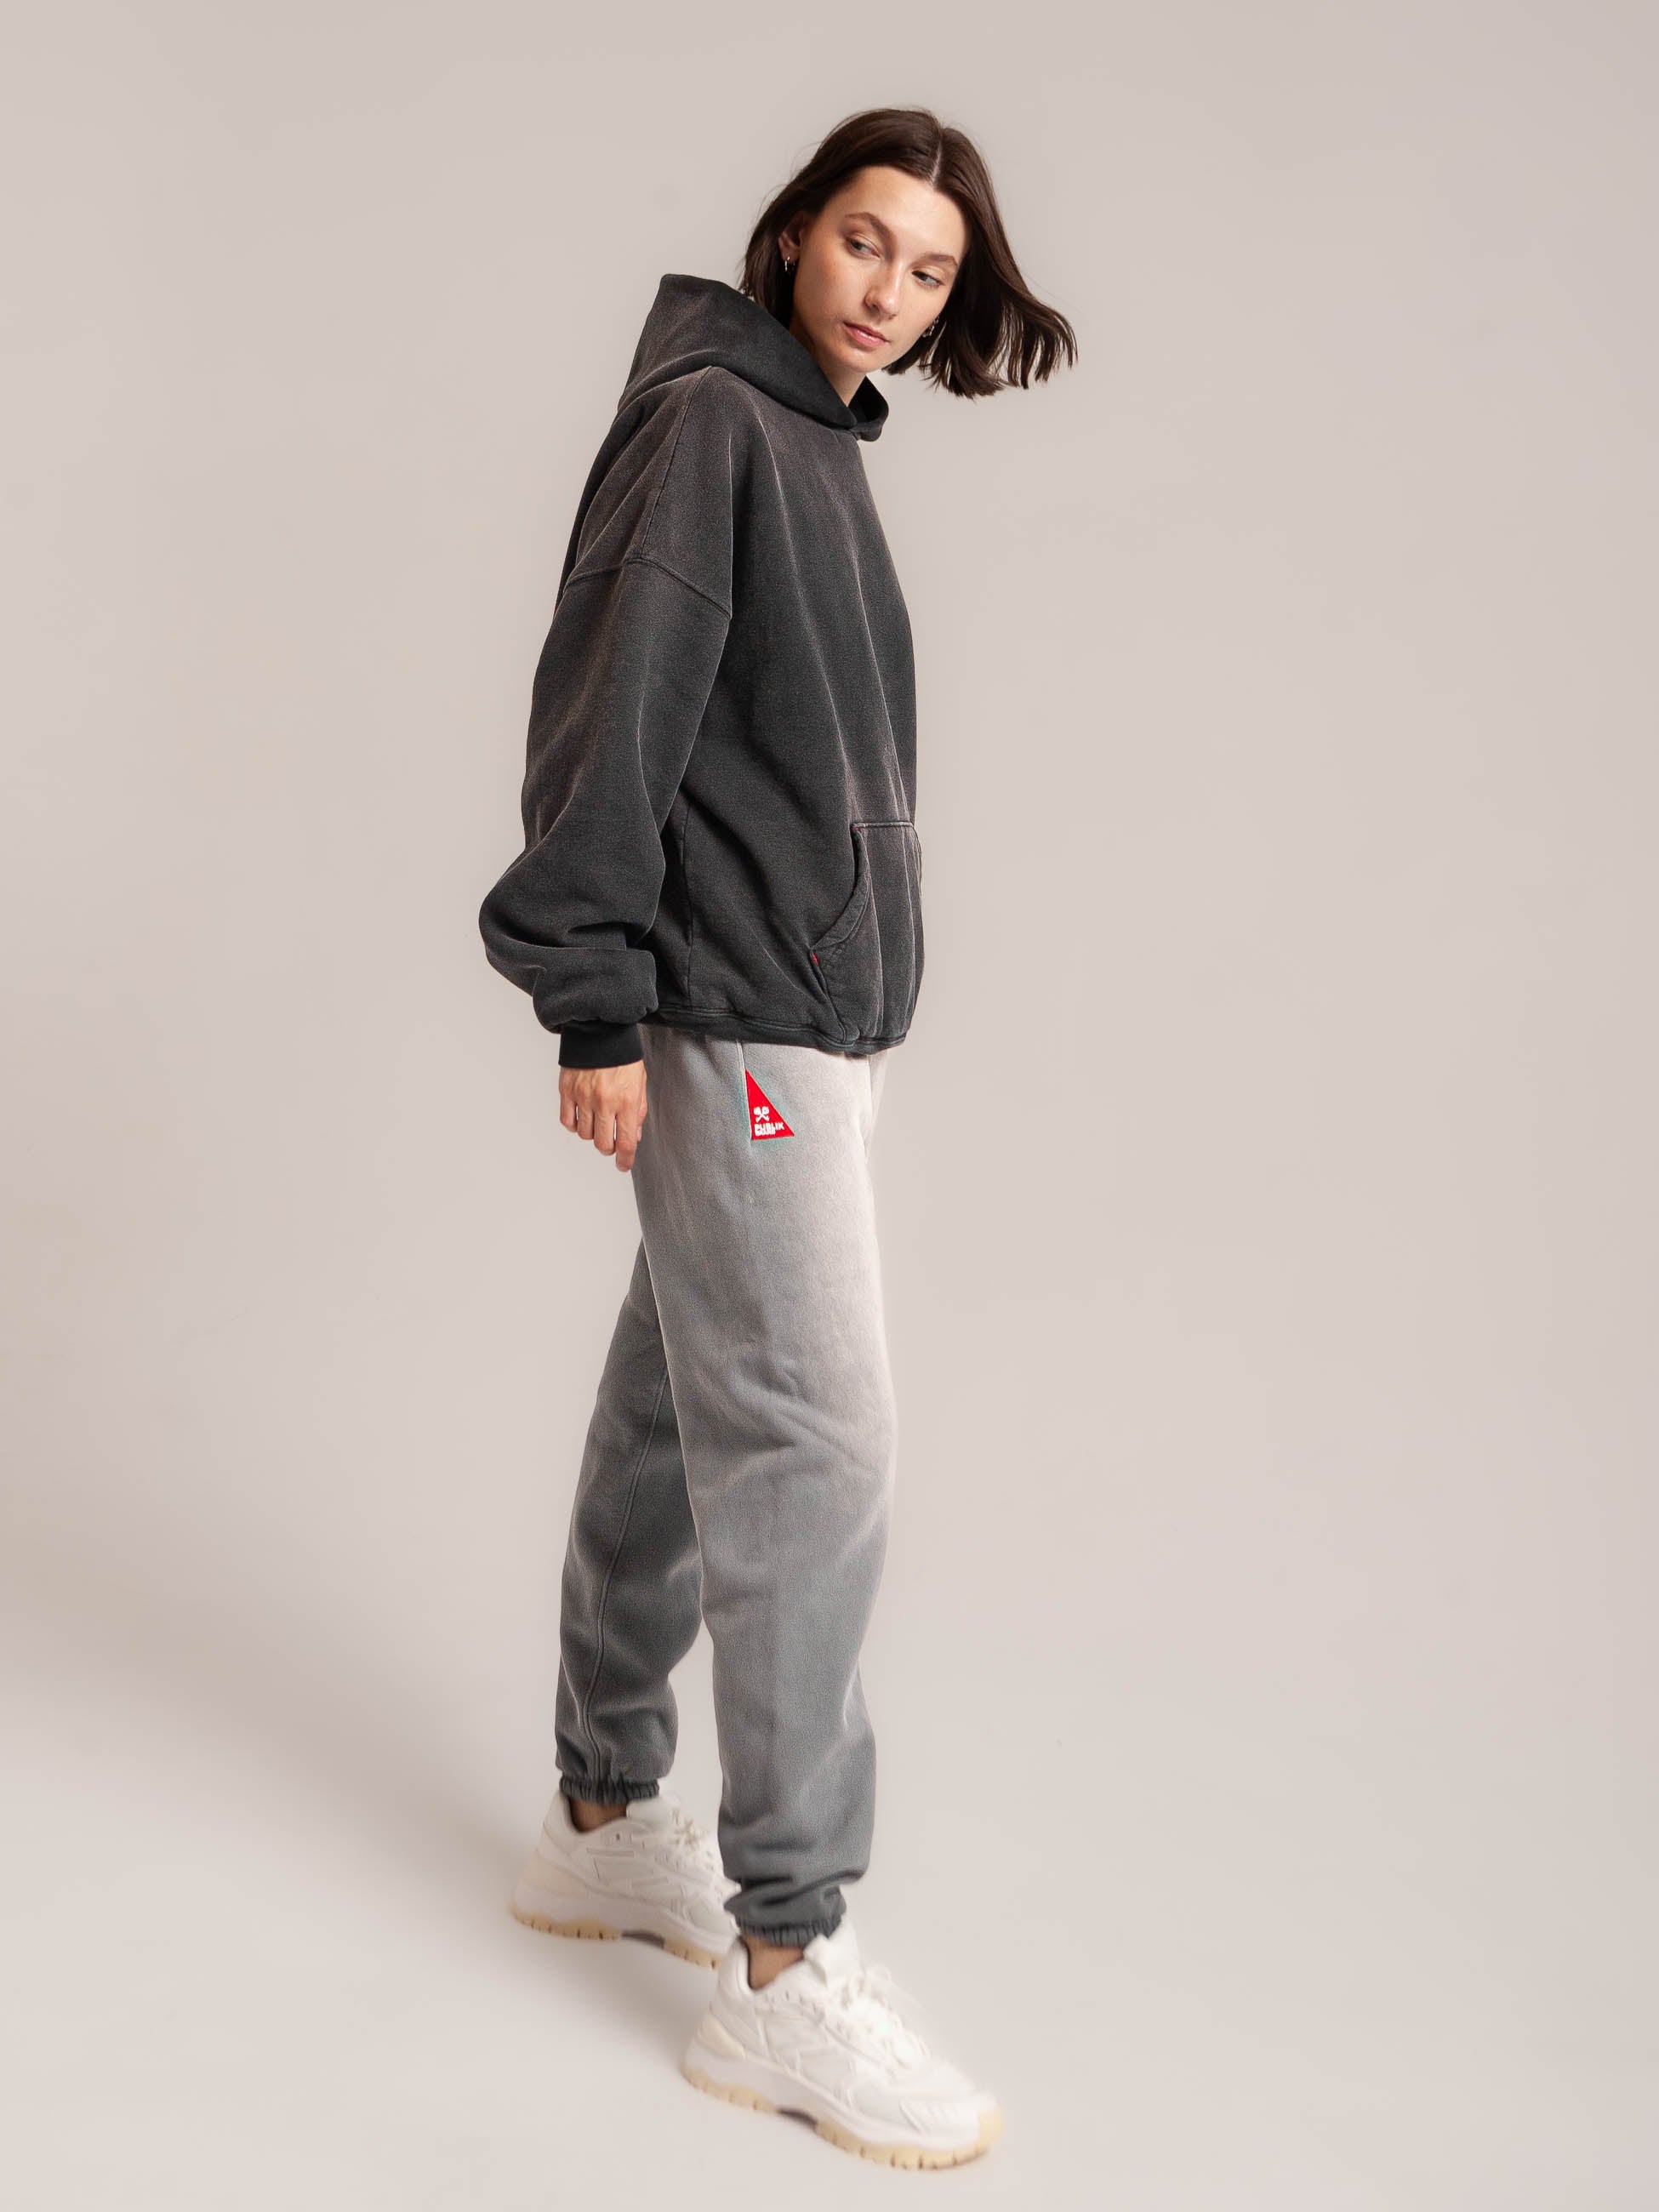 Female Model with Publik Brand  Double Layered Black Hoodie and  Ash Blue Sweatpants Double Layered Fleece Black Hoodie Flat Luxury Made in USA